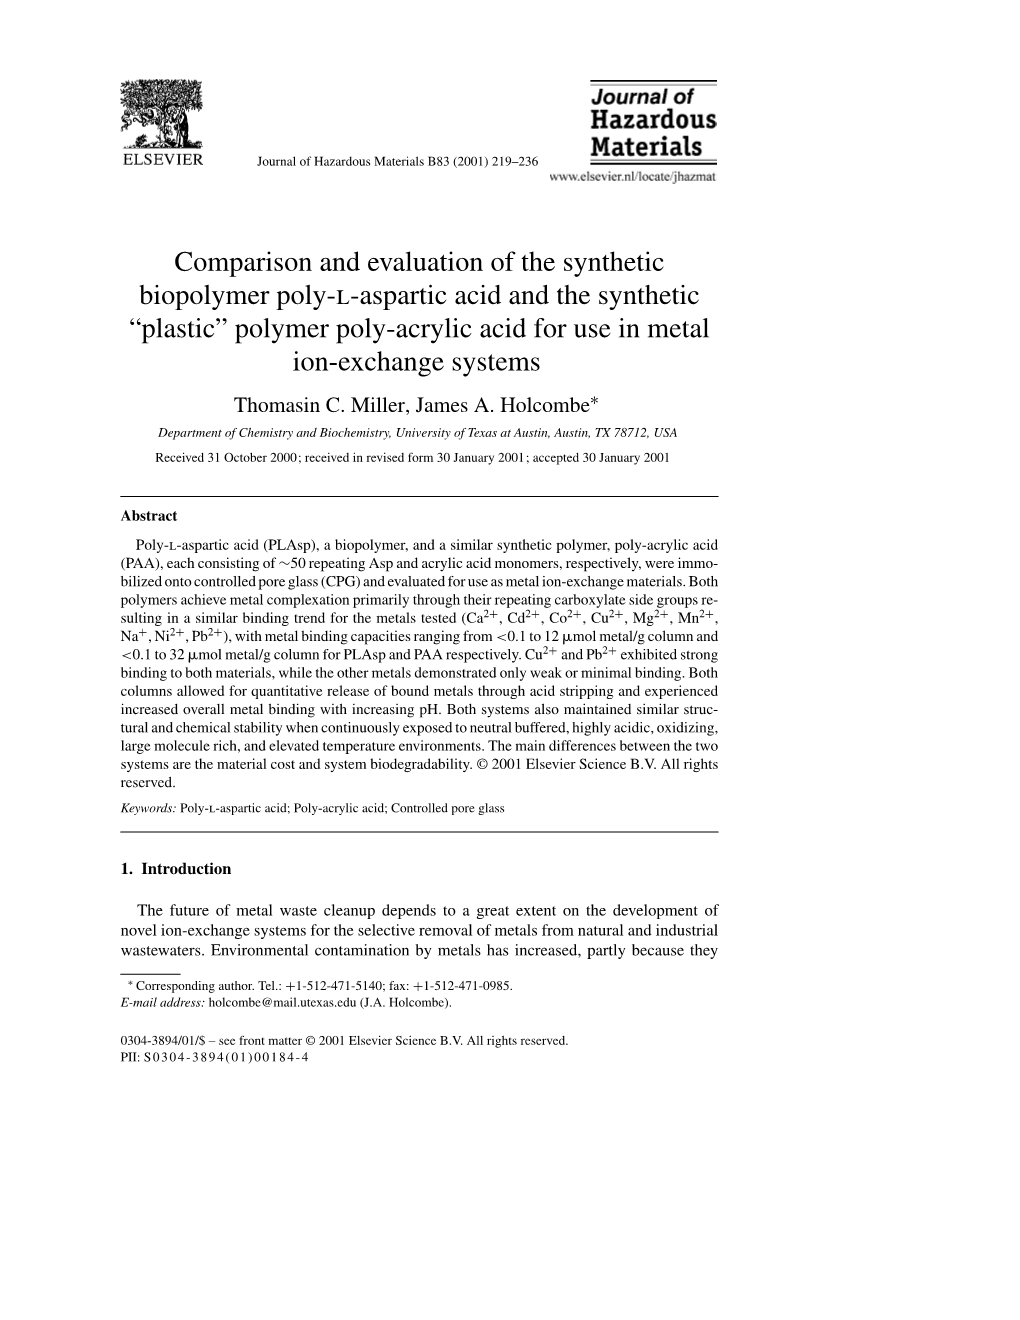 Comparison and Evaluation of the Synthetic Biopolymer Poly-L